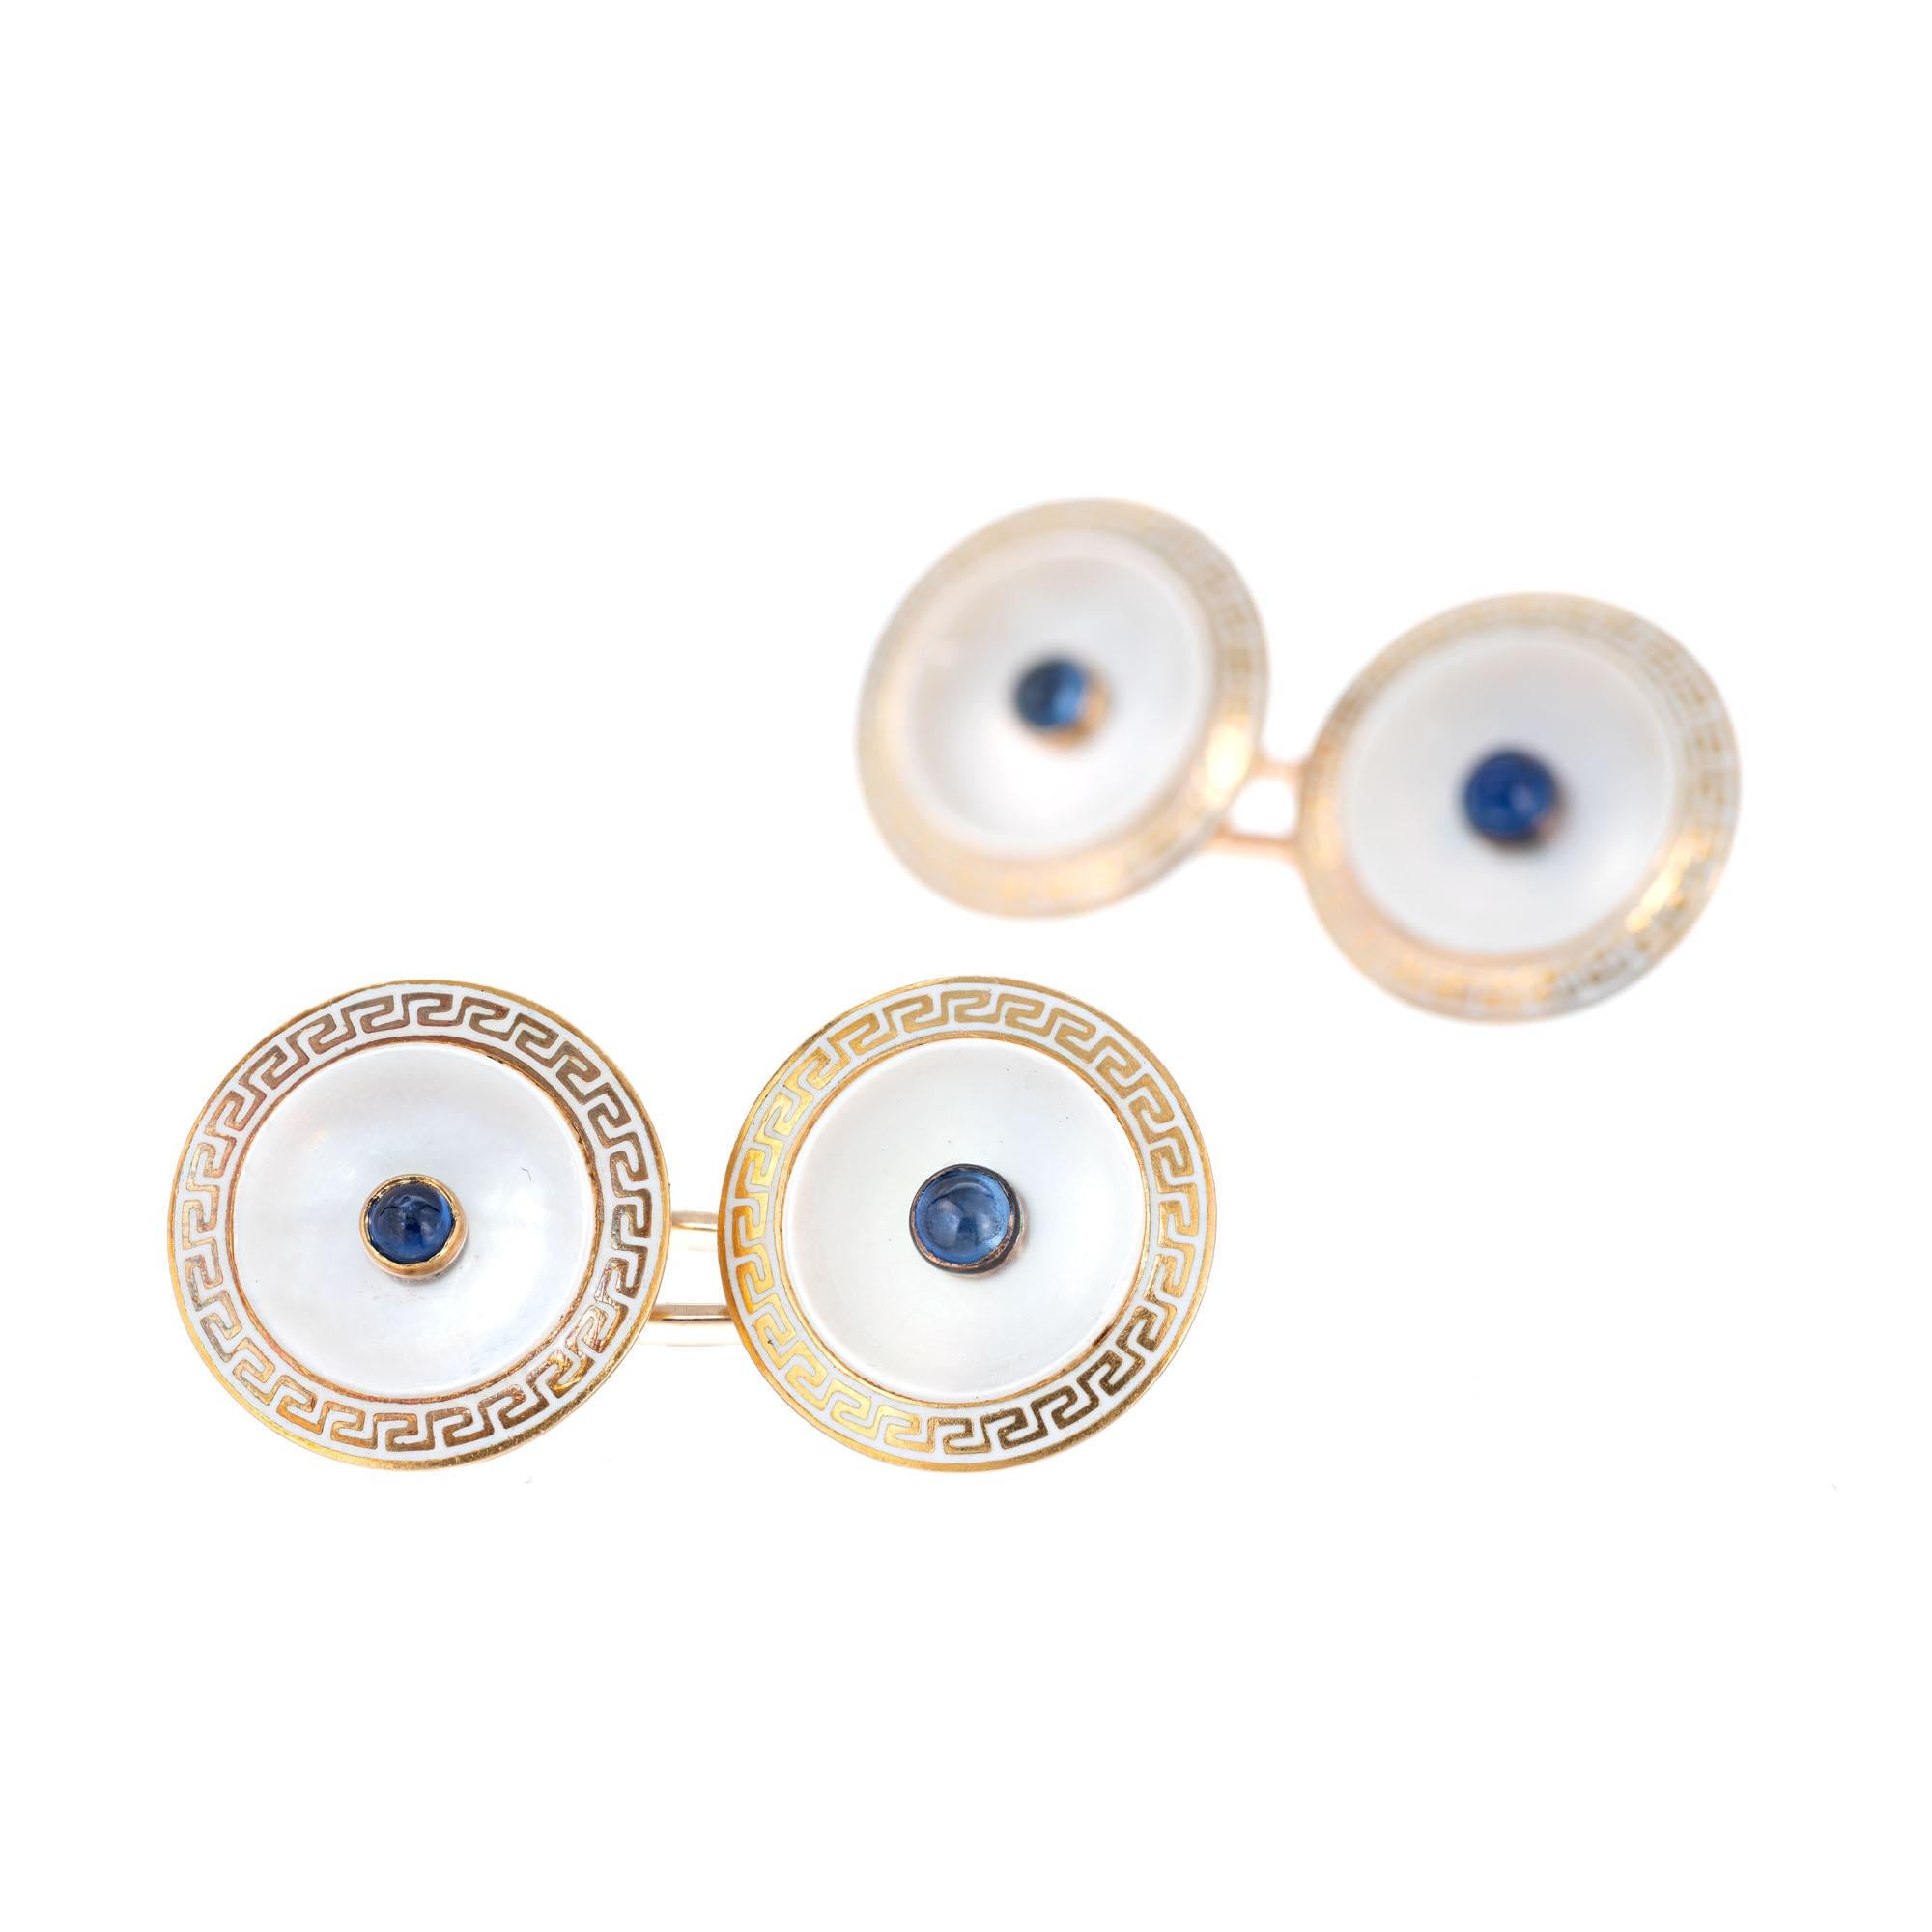 20.00 Carat Cabochon Sapphire Mother of Pearl Yellow Gold Cufflinks In Good Condition For Sale In Stamford, CT